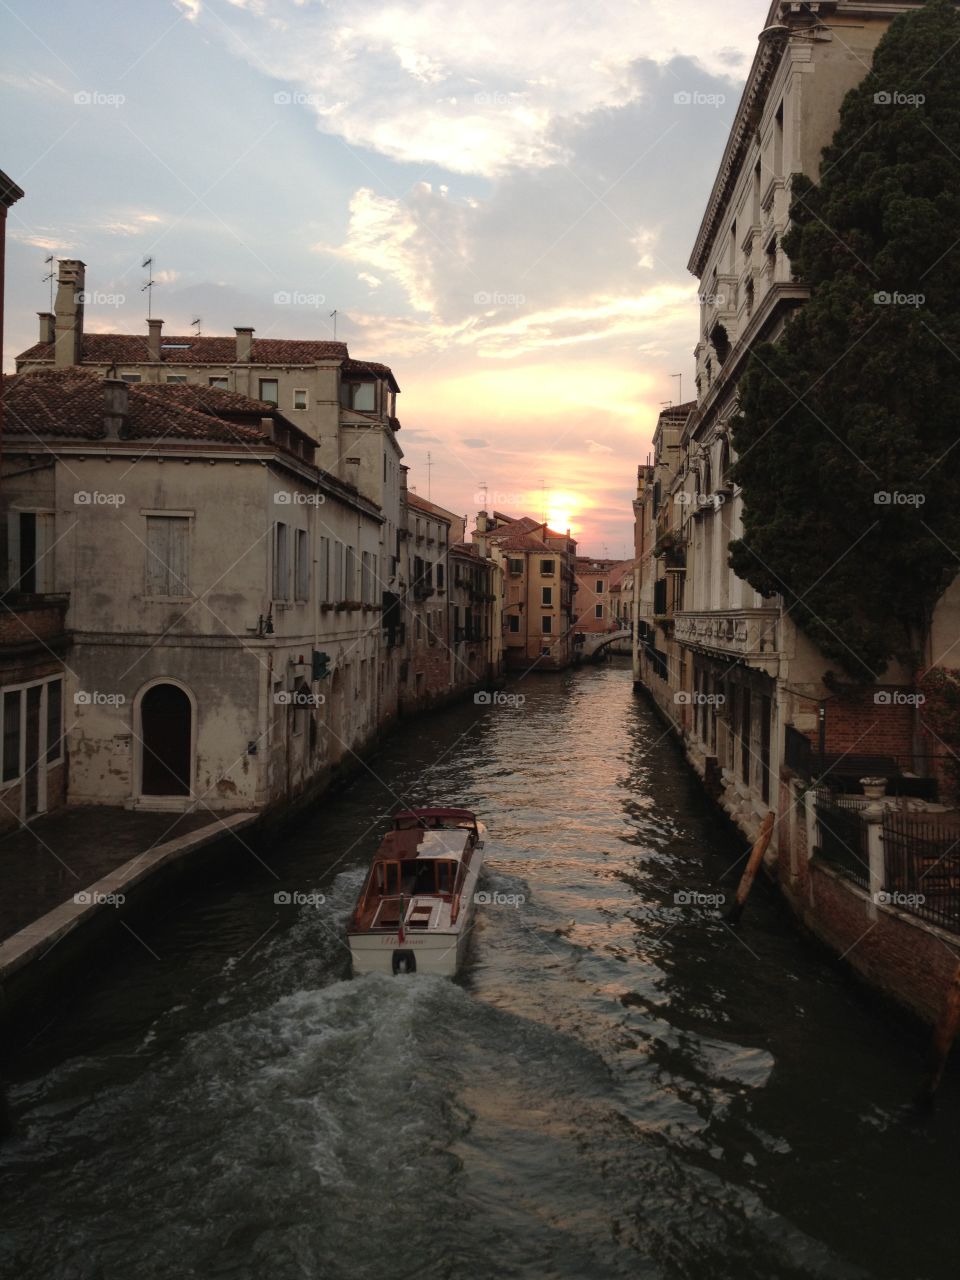 A boat navigating the canals of Venice, italy